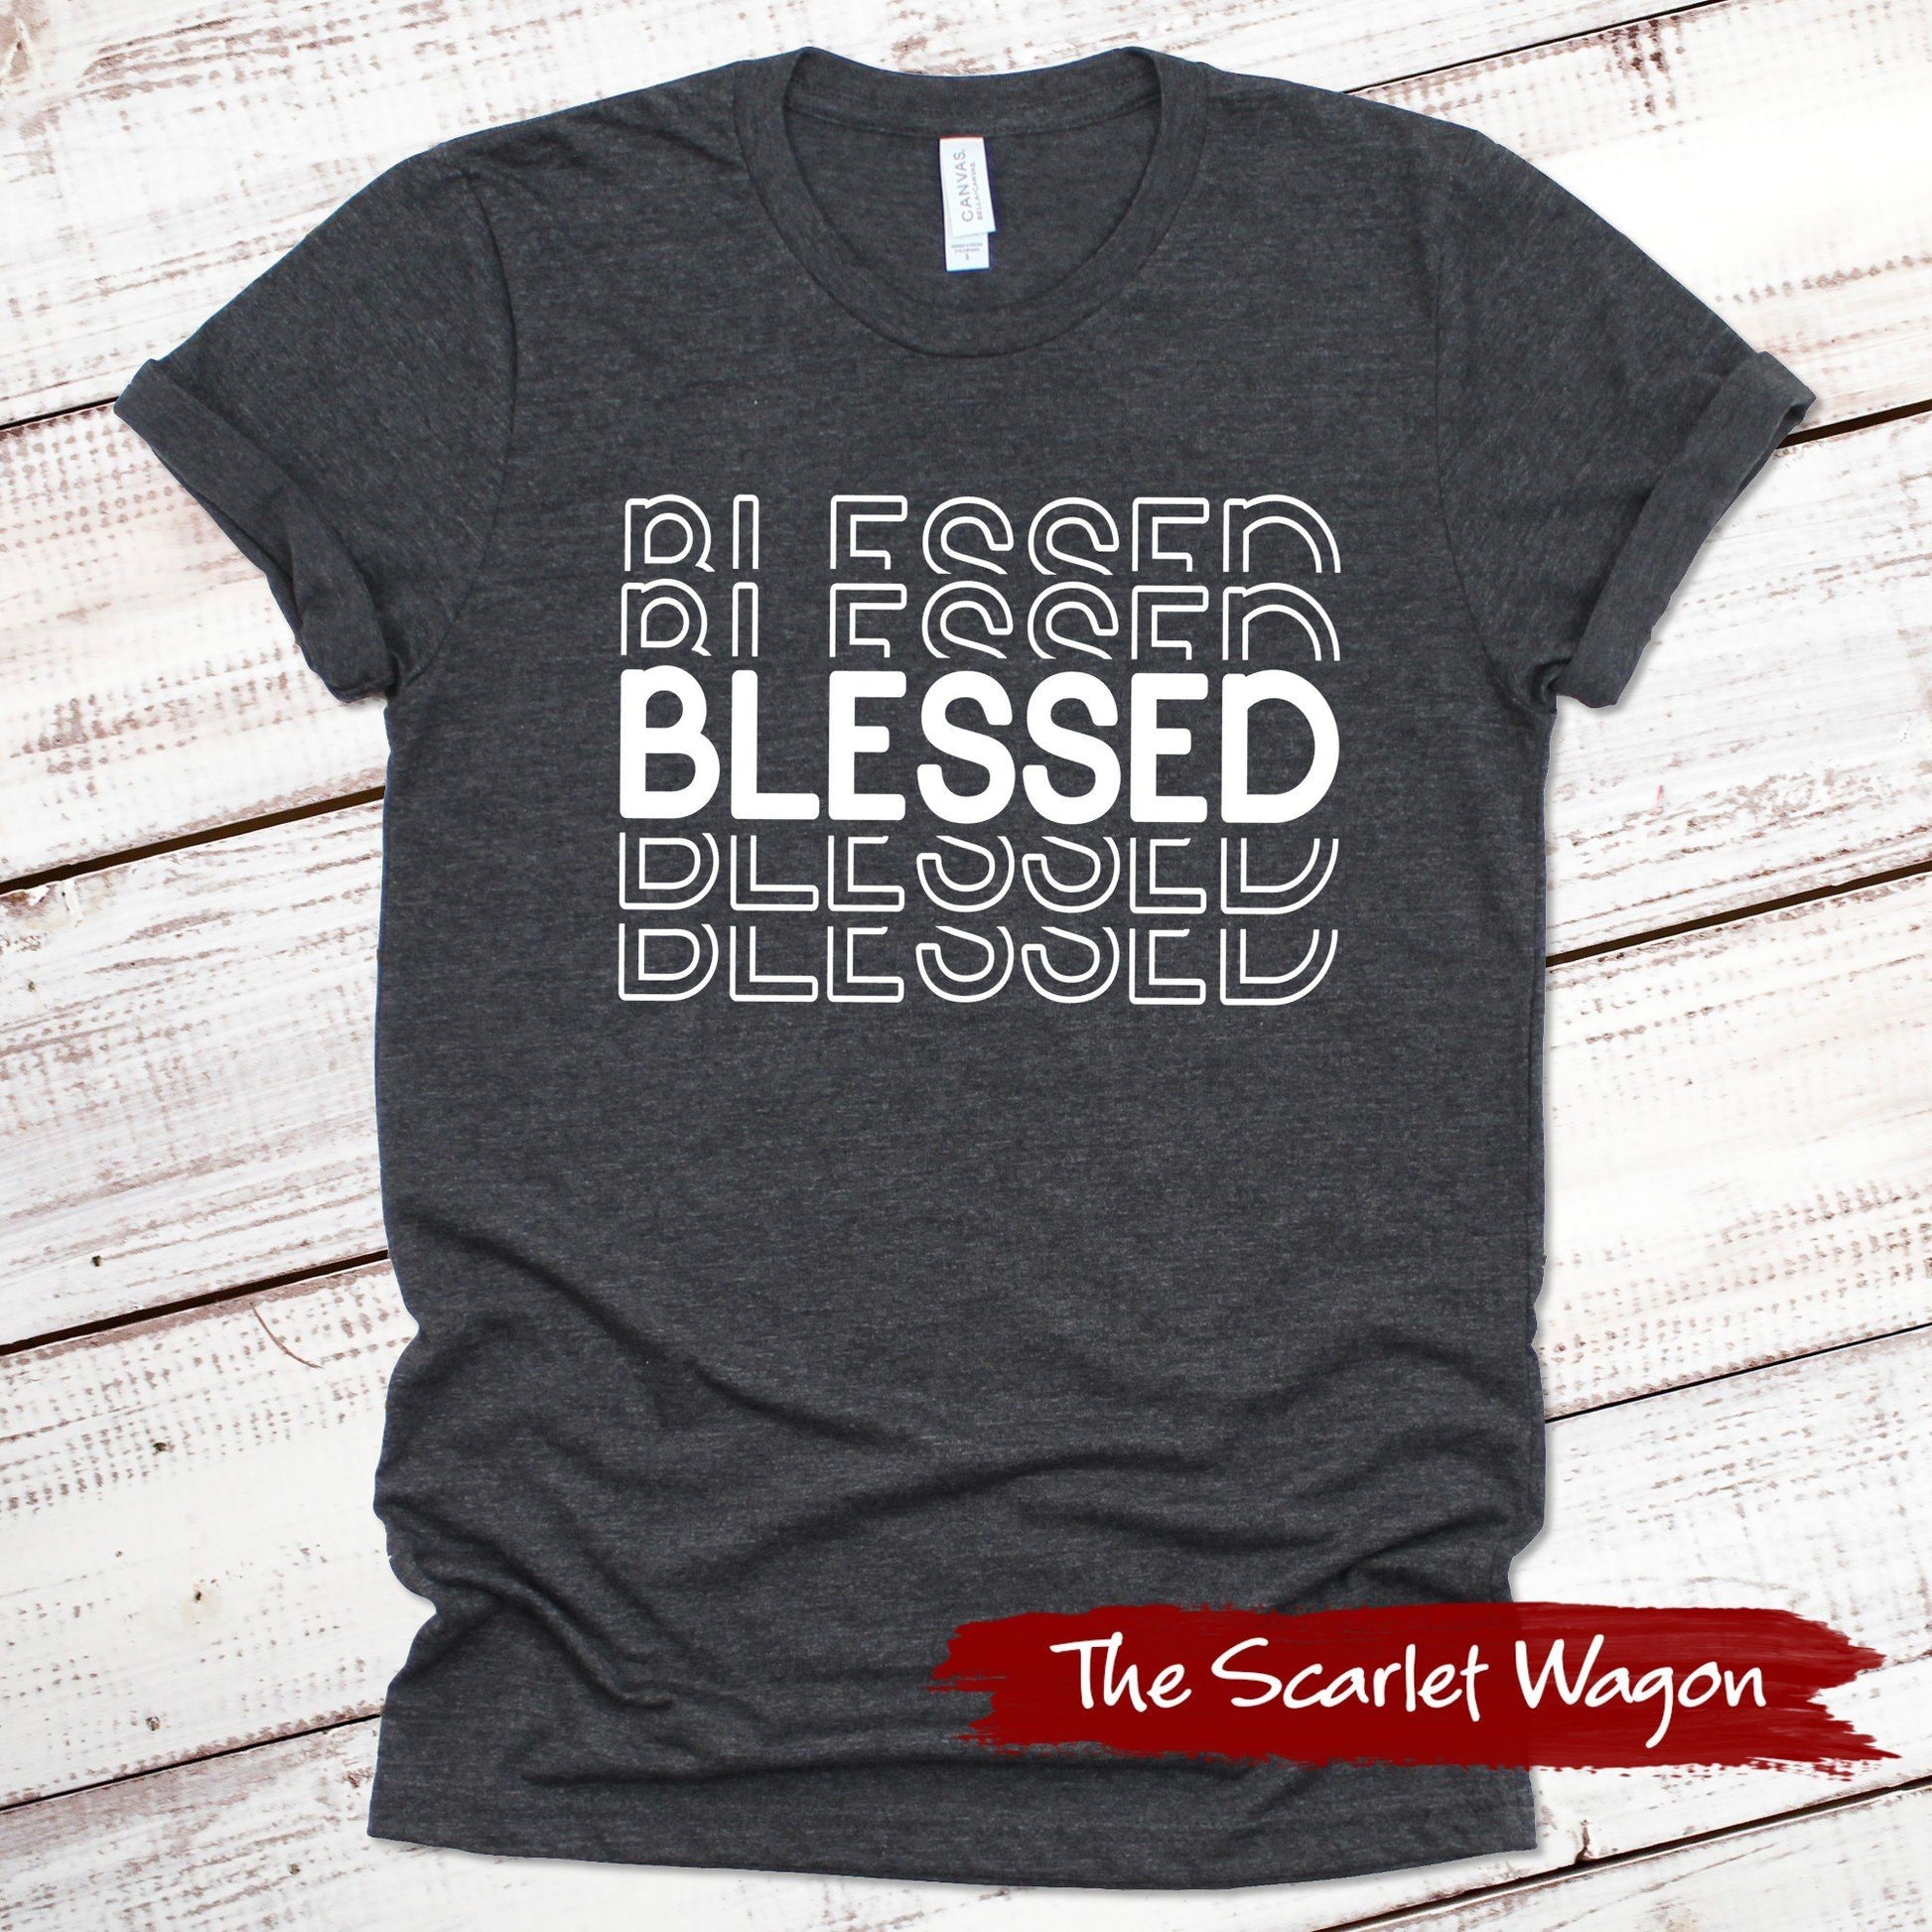 Blessed Fall Shirts Scarlet Wagon Dark Gray Heather XS 